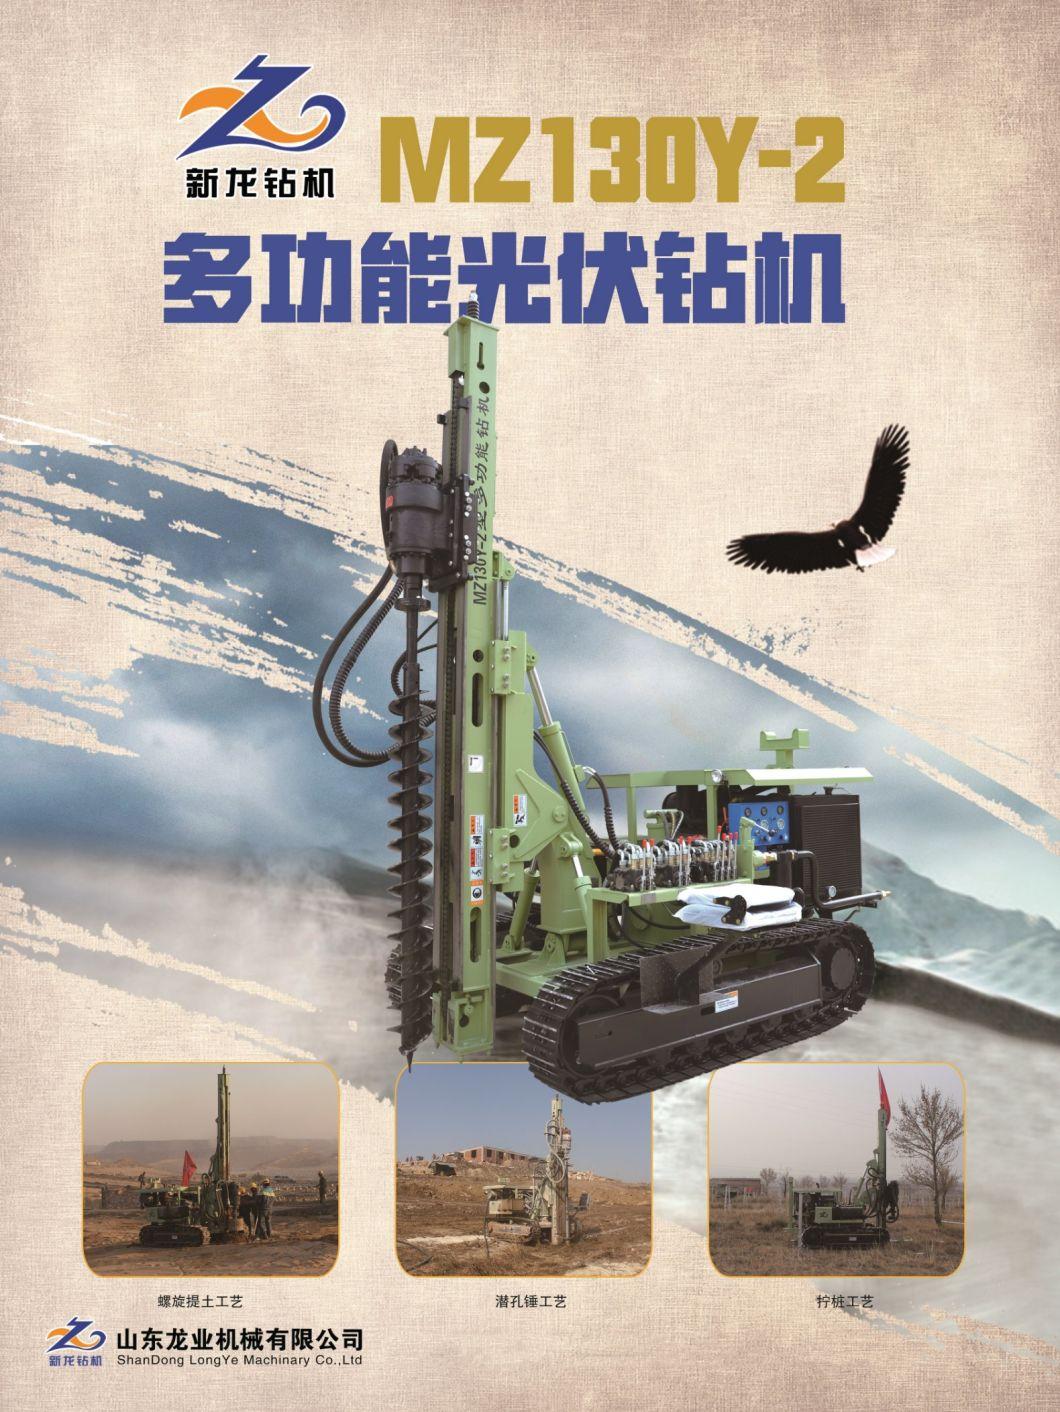 Mini Screw Pile Driving Machine for PV Project